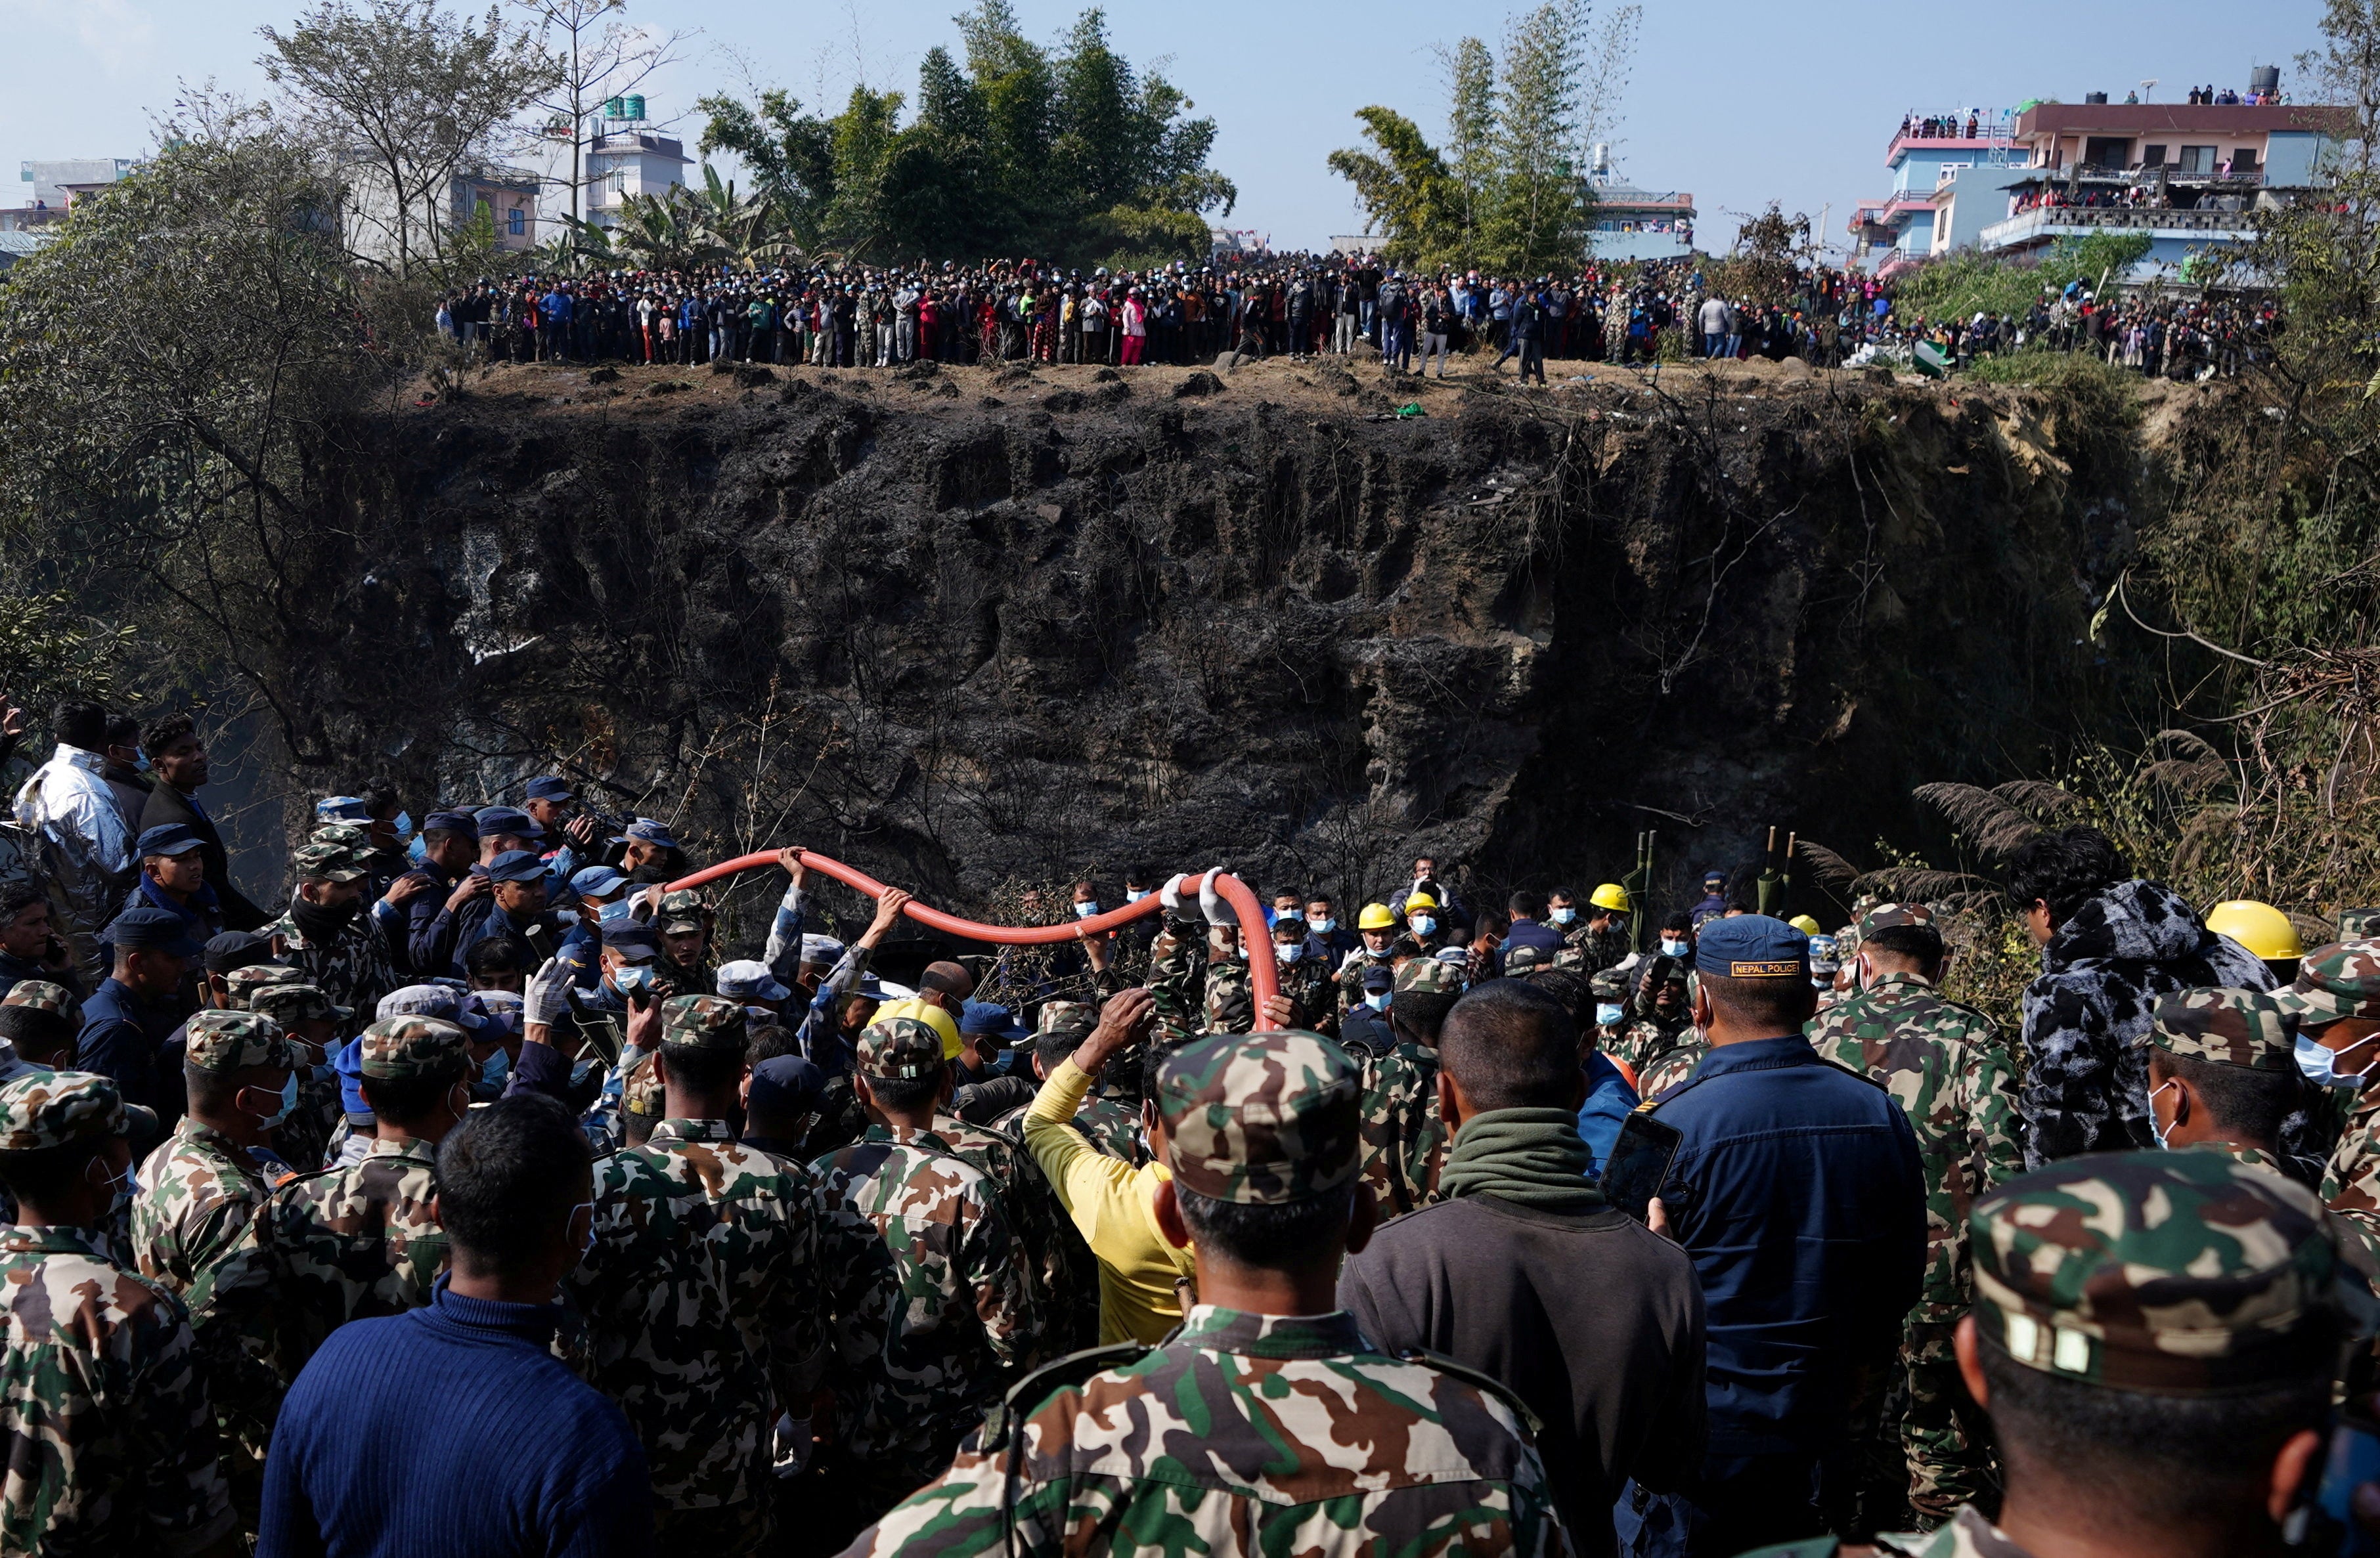 The aircraft is reported to have crashed between the old airport and Pokhara international airport